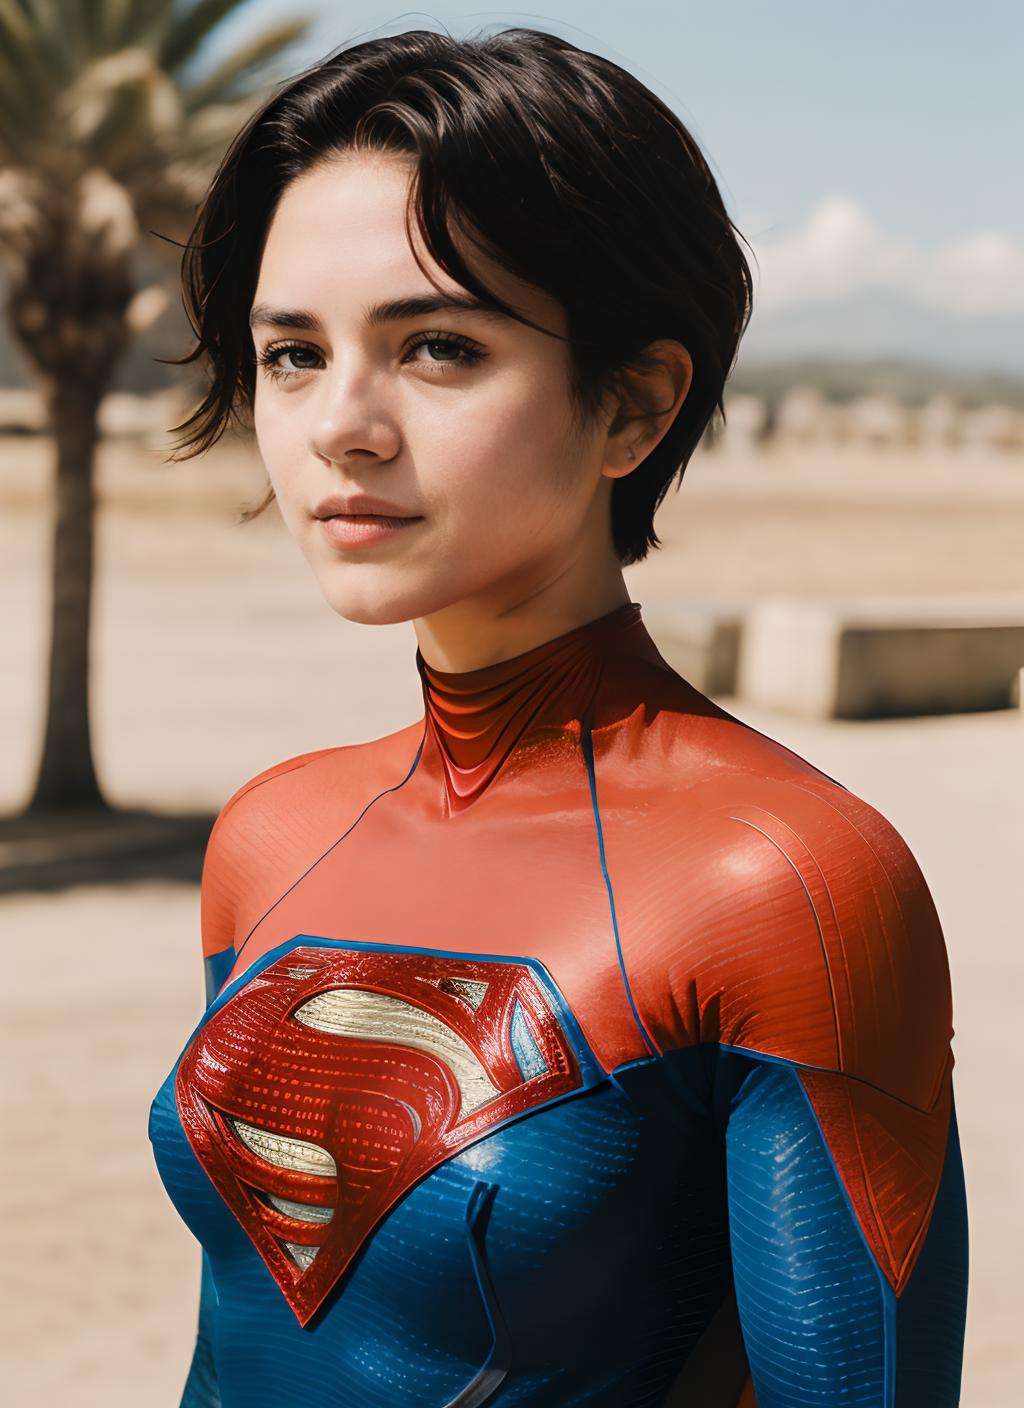 photo of supergirl, short hair, bodysuit, outdoors sunny day, background battle, analog style (look at viewer:1.2) (skin texture), Fujifilm XT3, DSLR, 50mm  <lora:Sasha Calle SupergirlV2:0.85>